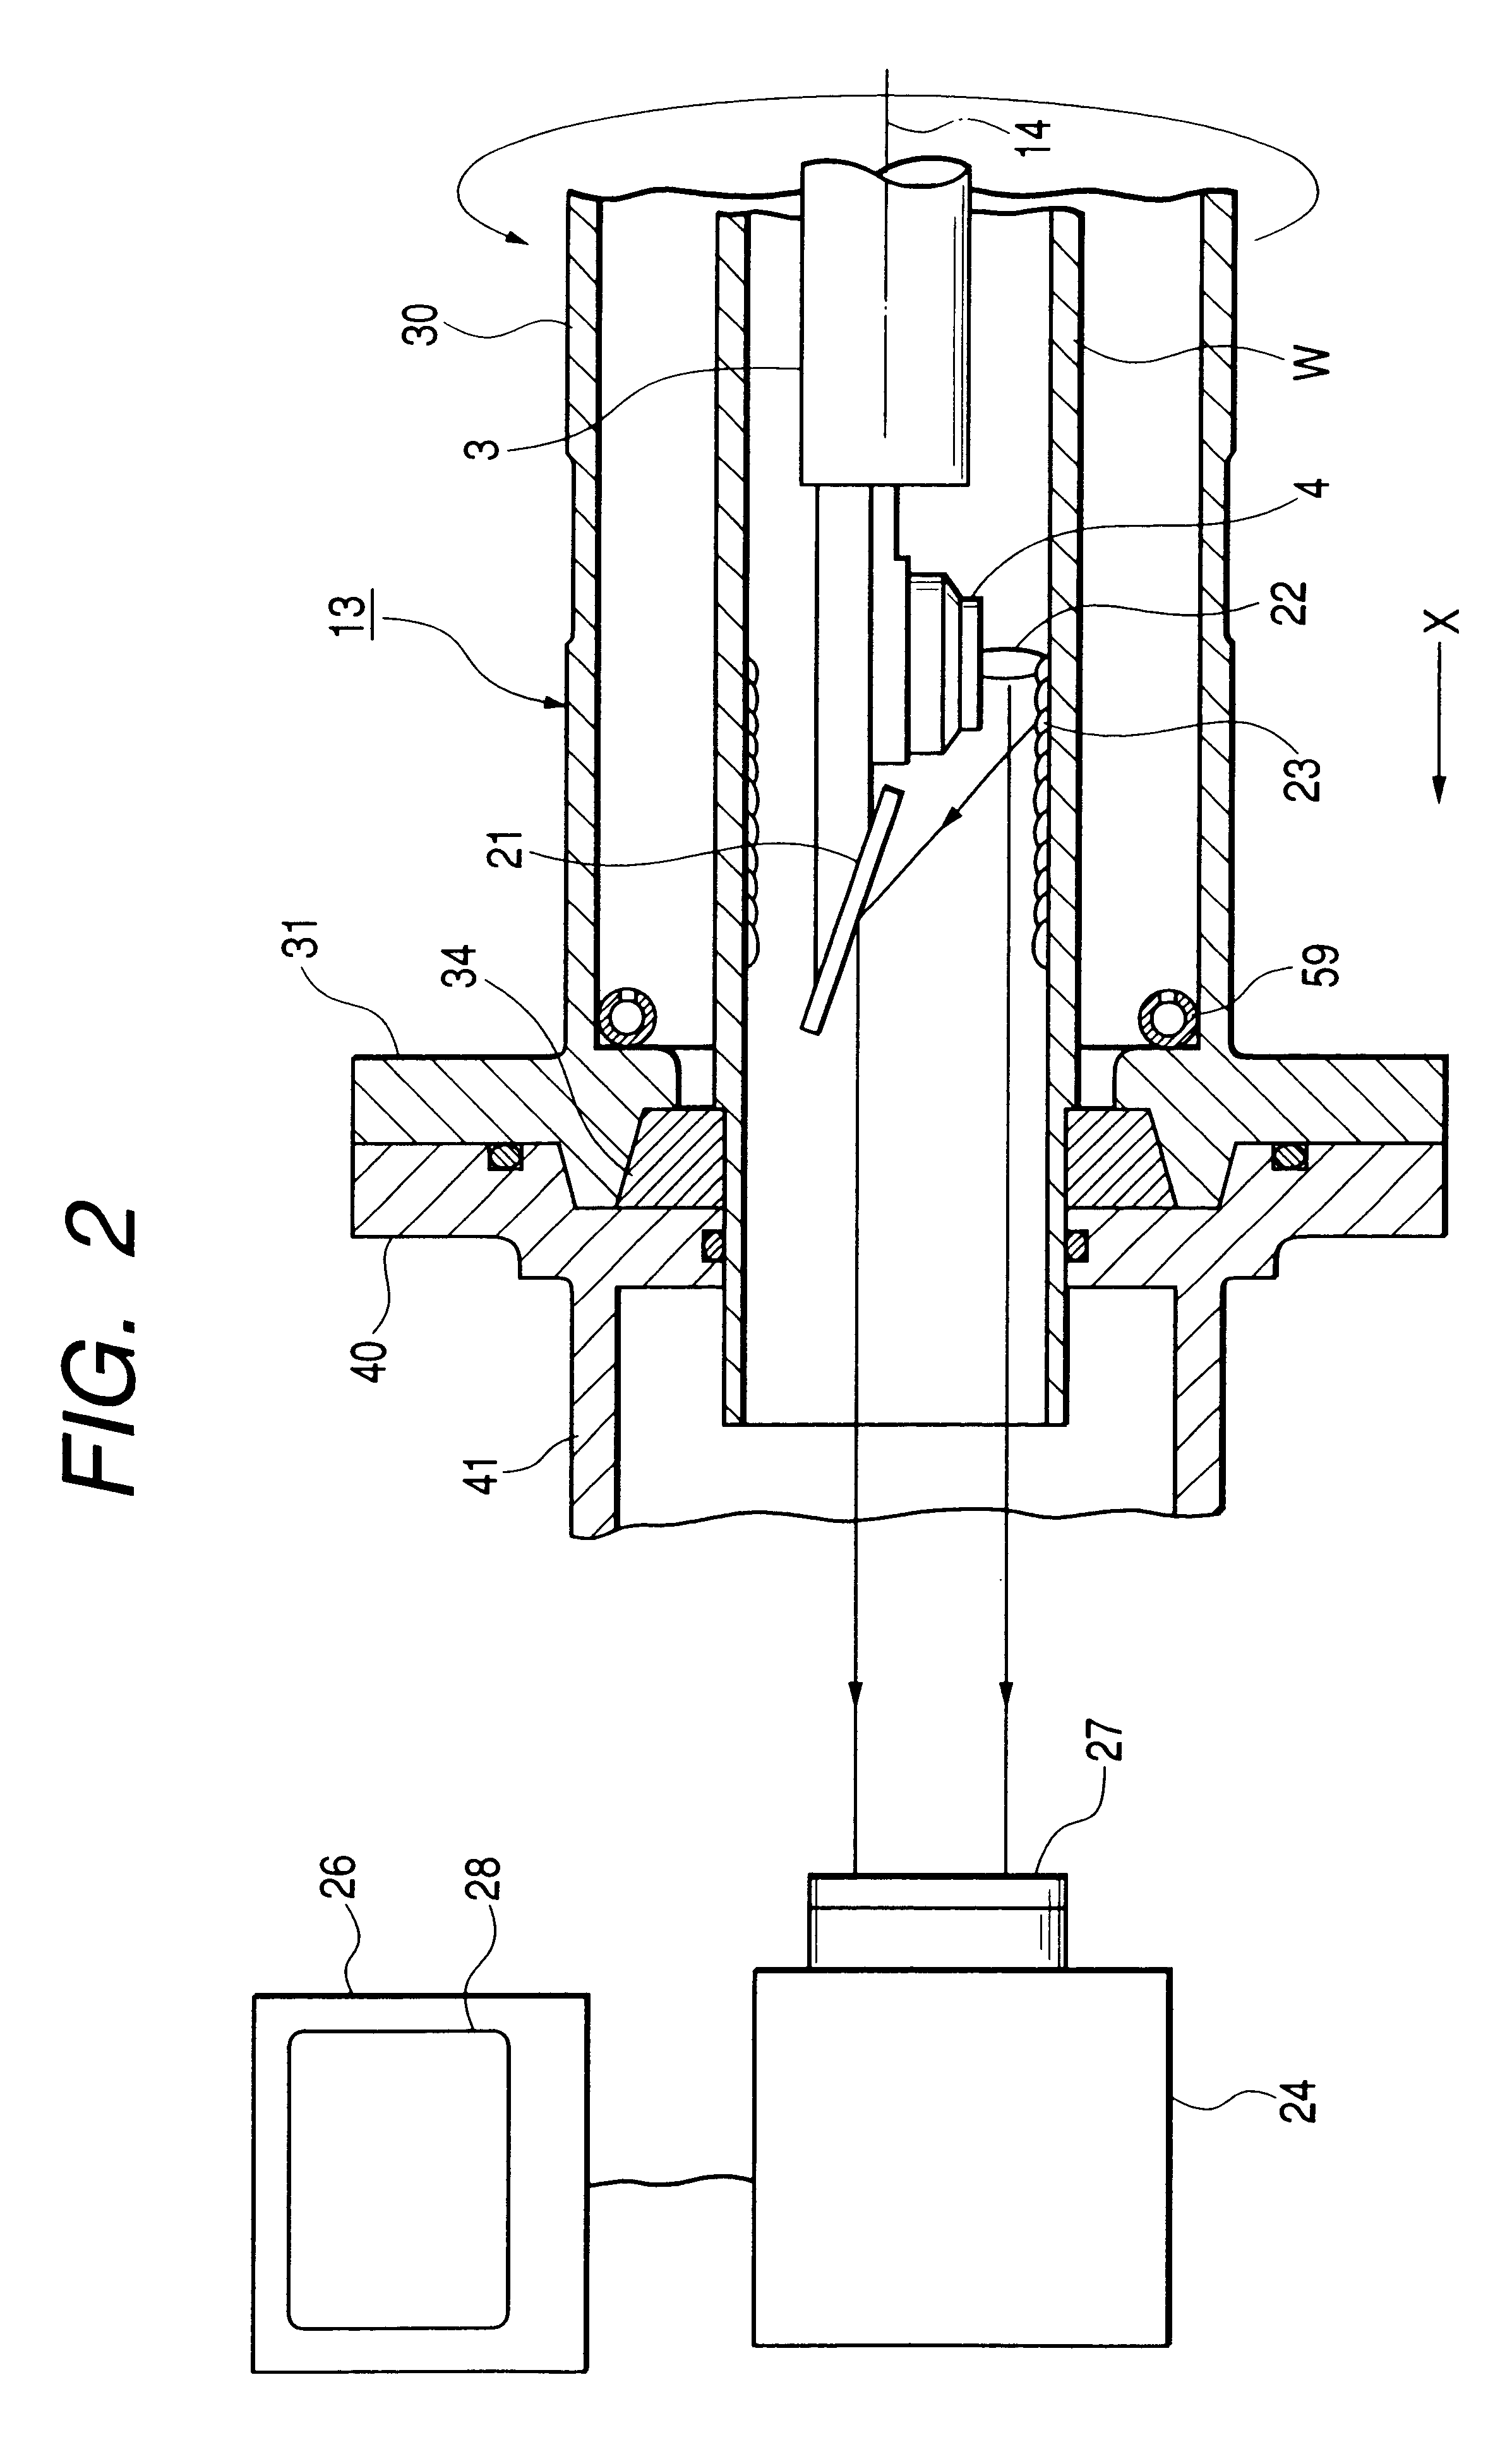 Internal metal pipe welding apparatus and monitoring system